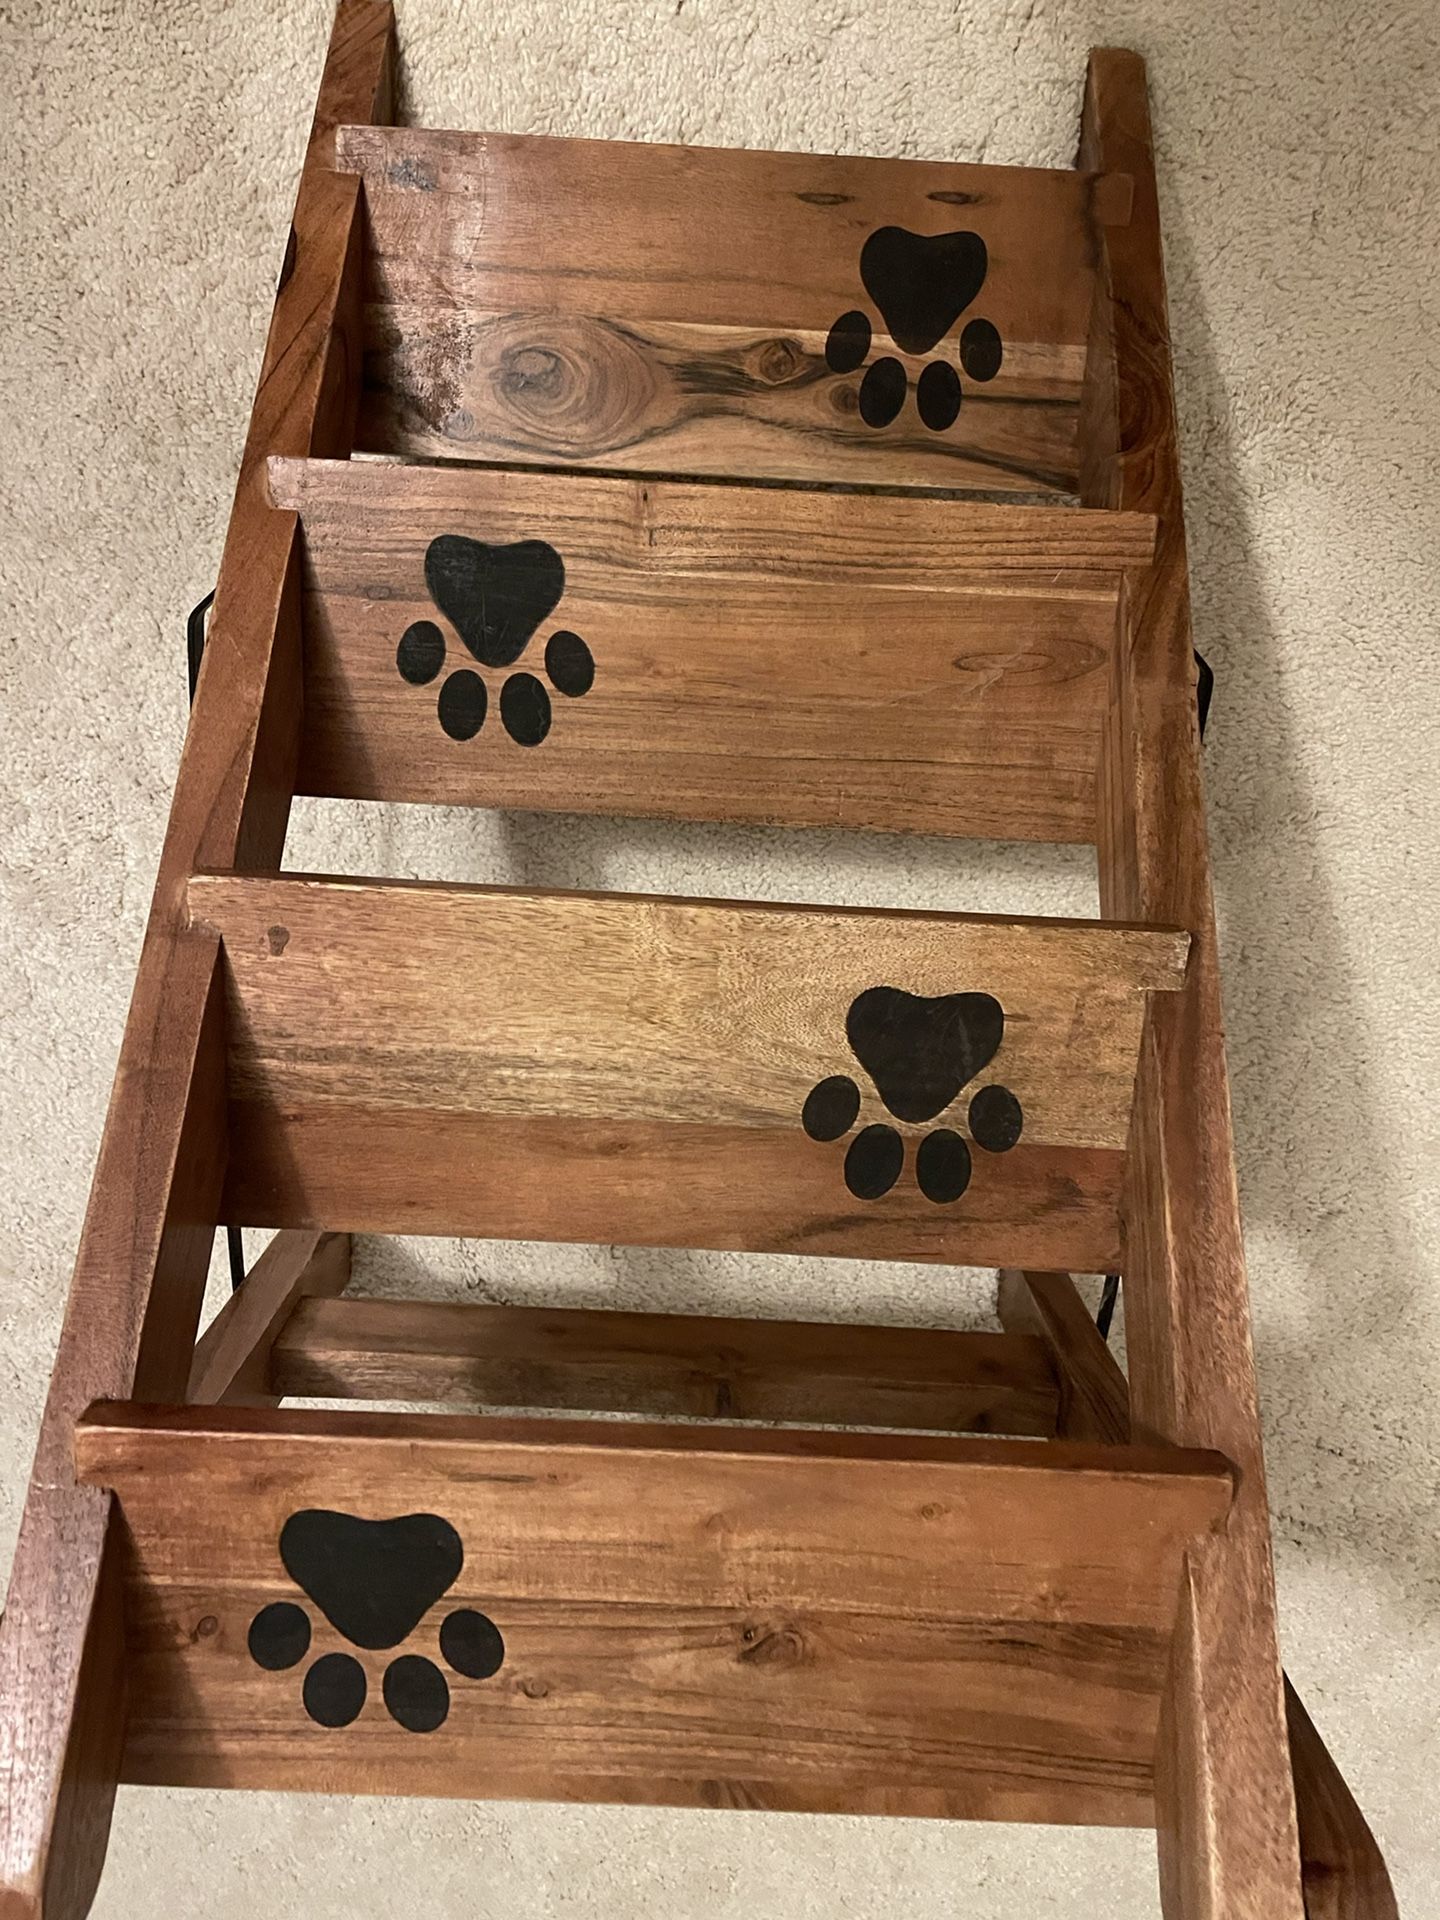 Step Ladder For Dogs